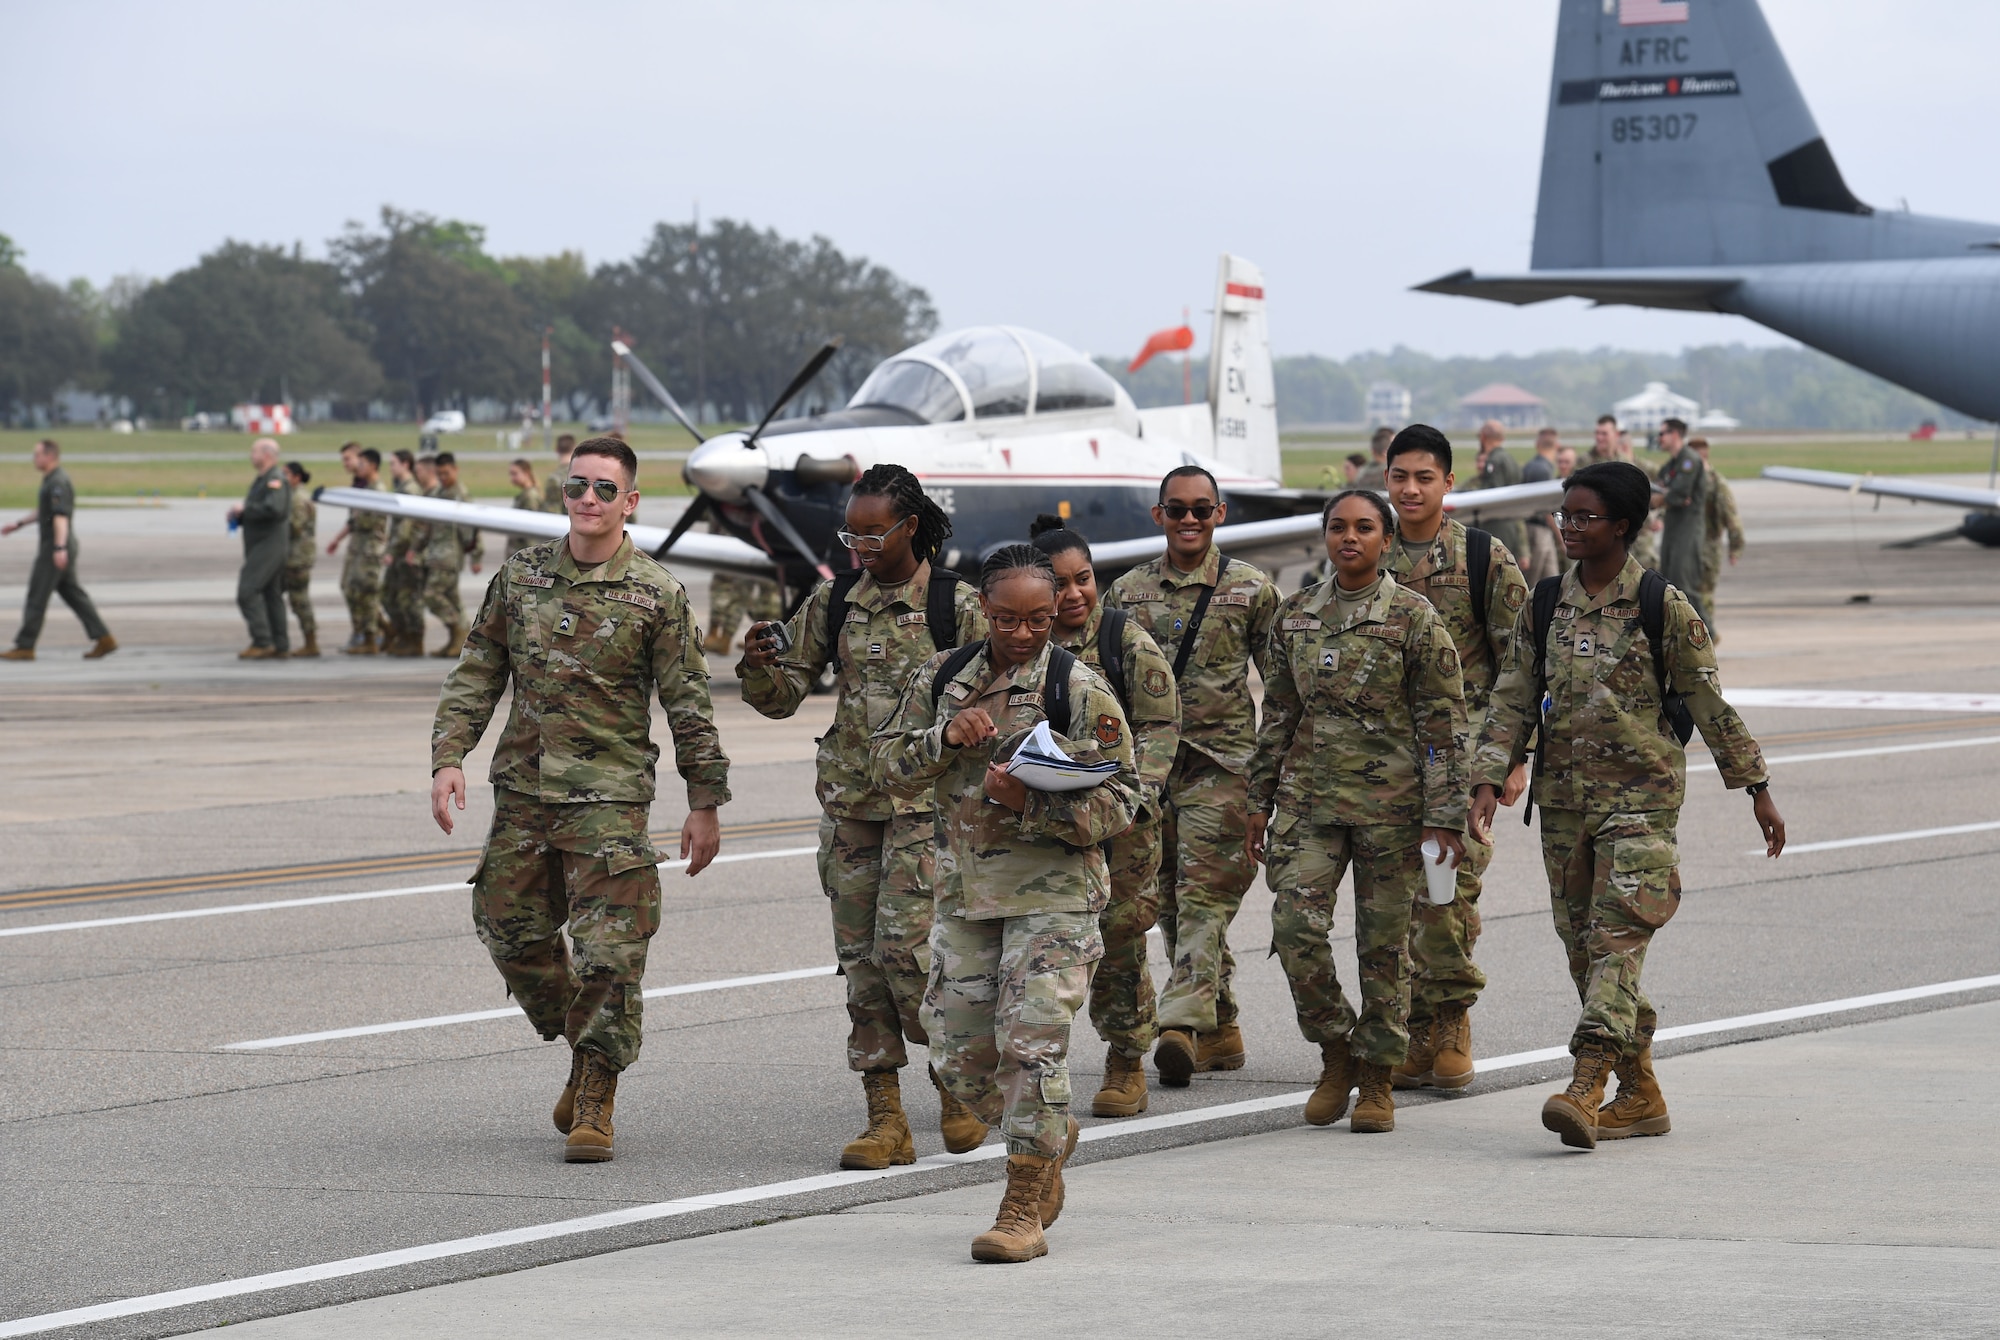 Air Force ROTC cadets walk across the flight line during Pathways to Blue at Keesler Air Force Base, Mississippi, March 31, 2023.